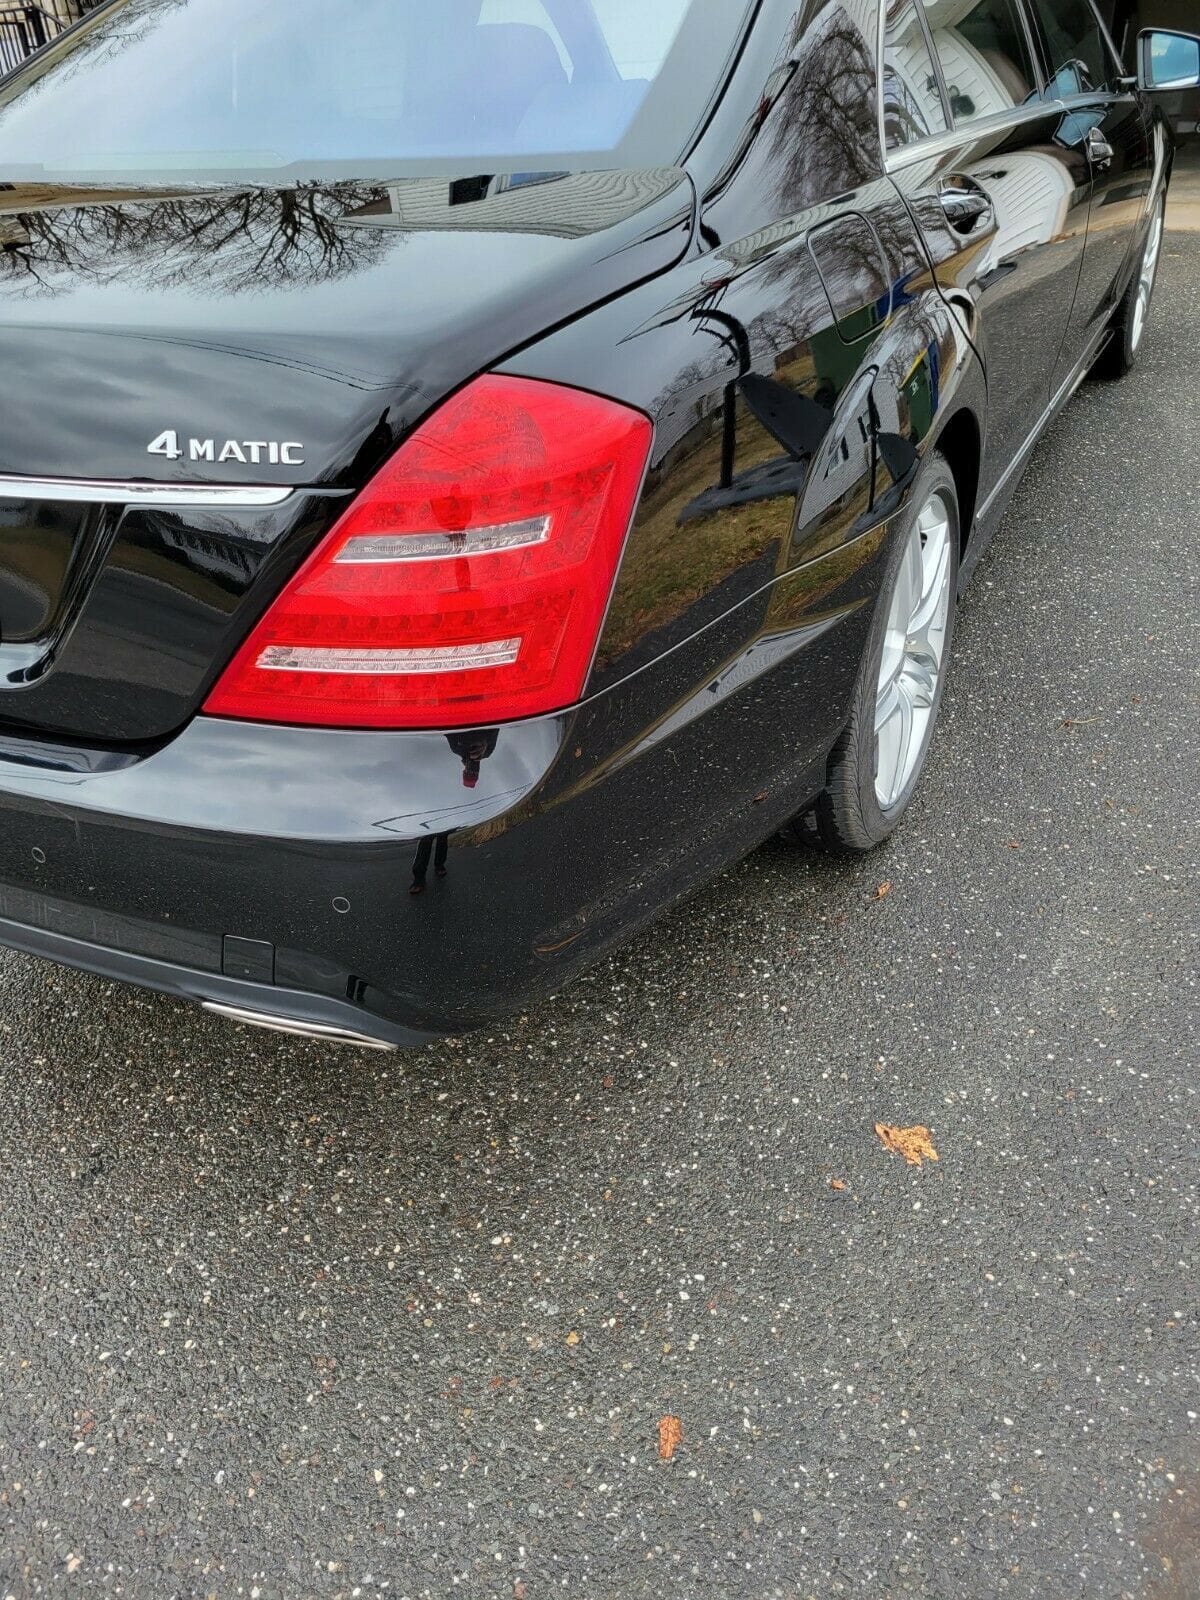 Exterior Body Parts - FS: Mercedes W221 S550 S600 AMG Rear Bumper Cover Assembly Sport Black OEM - Used - 2007 to 2013 Mercedes-Benz S550 - Waterbury, CT 06708, United States